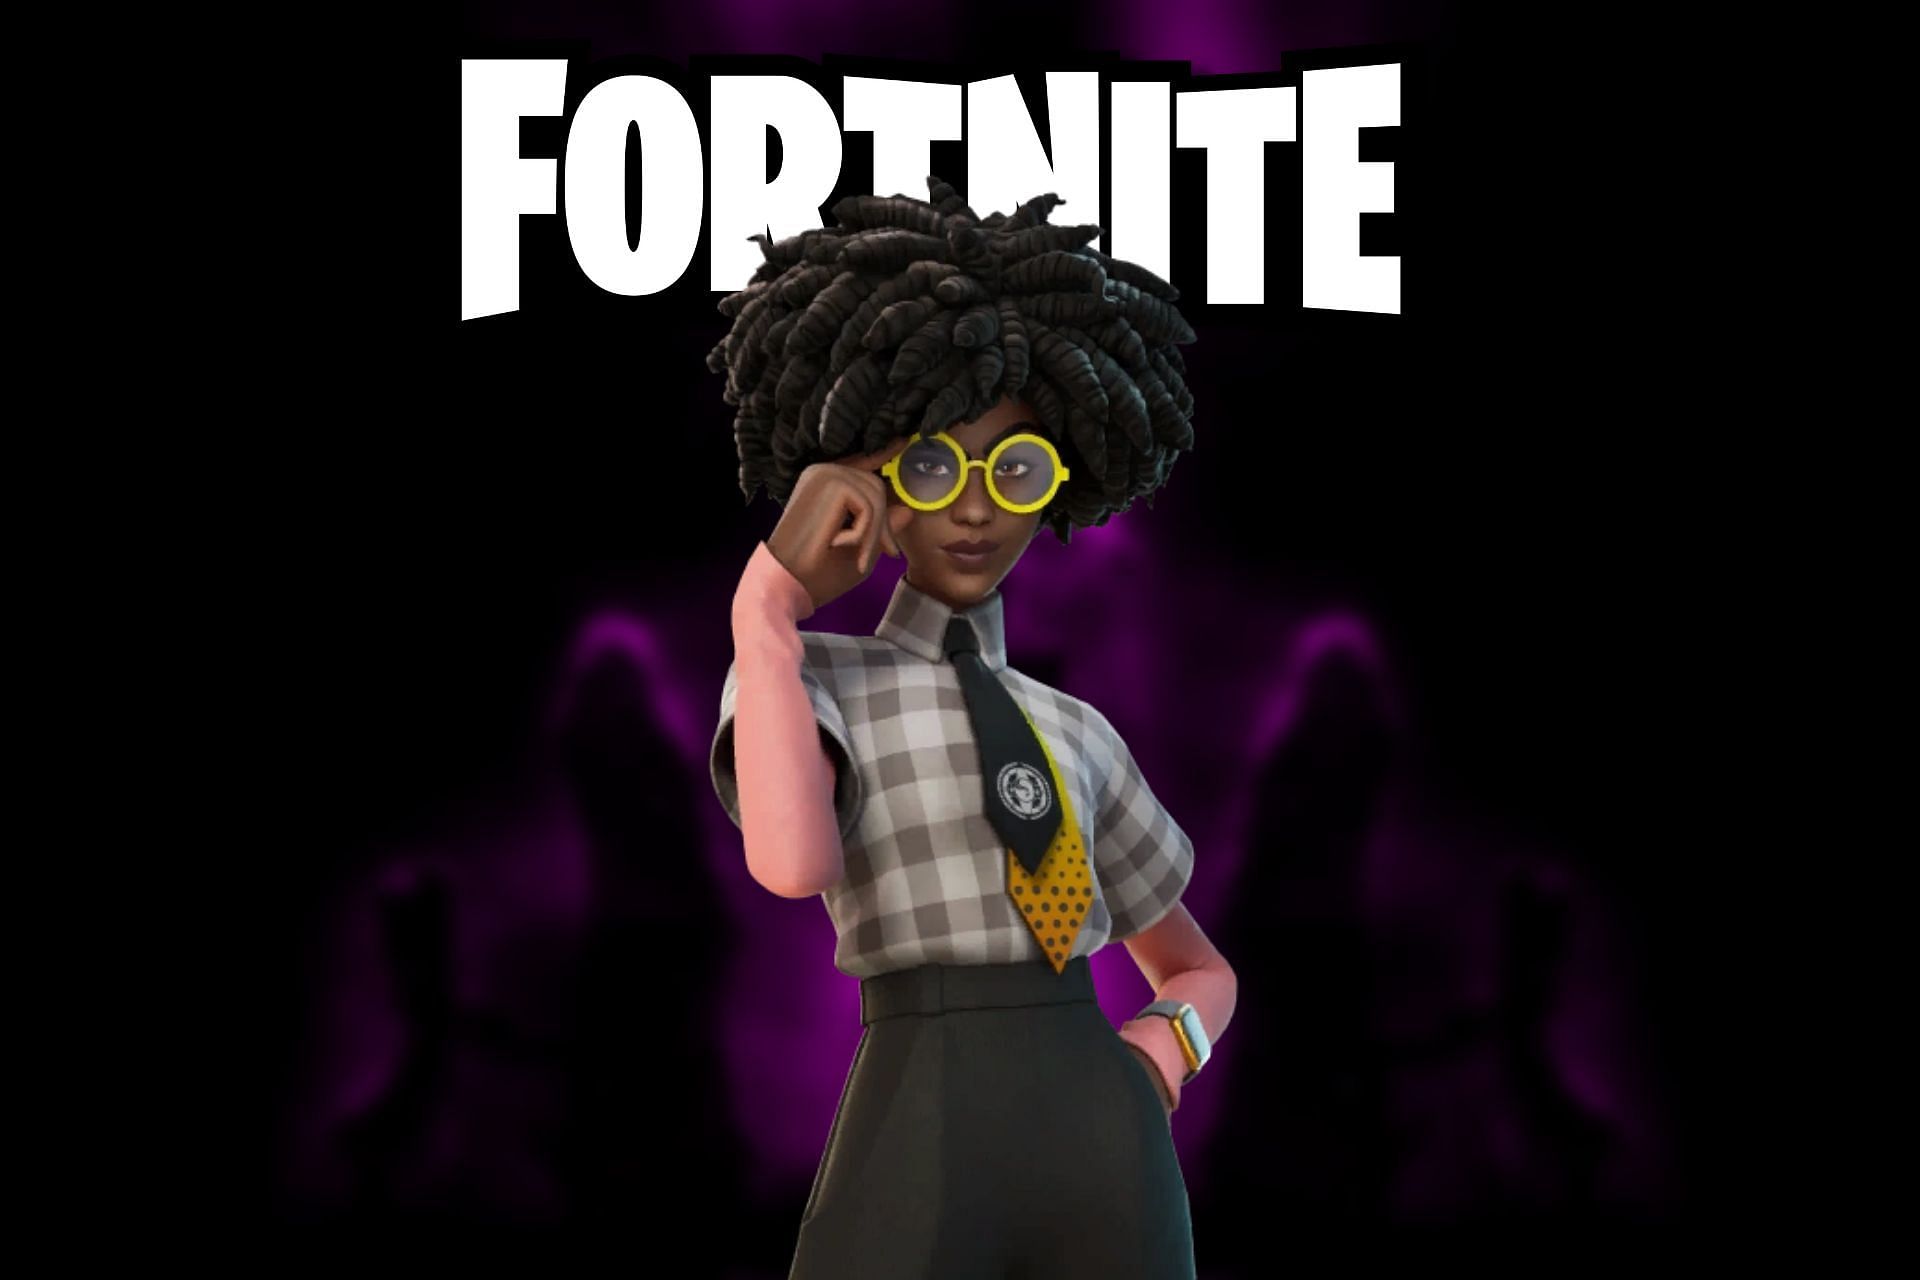 Dr Slone could be the most hated character in Fortnite (Image via Sportskeeda)